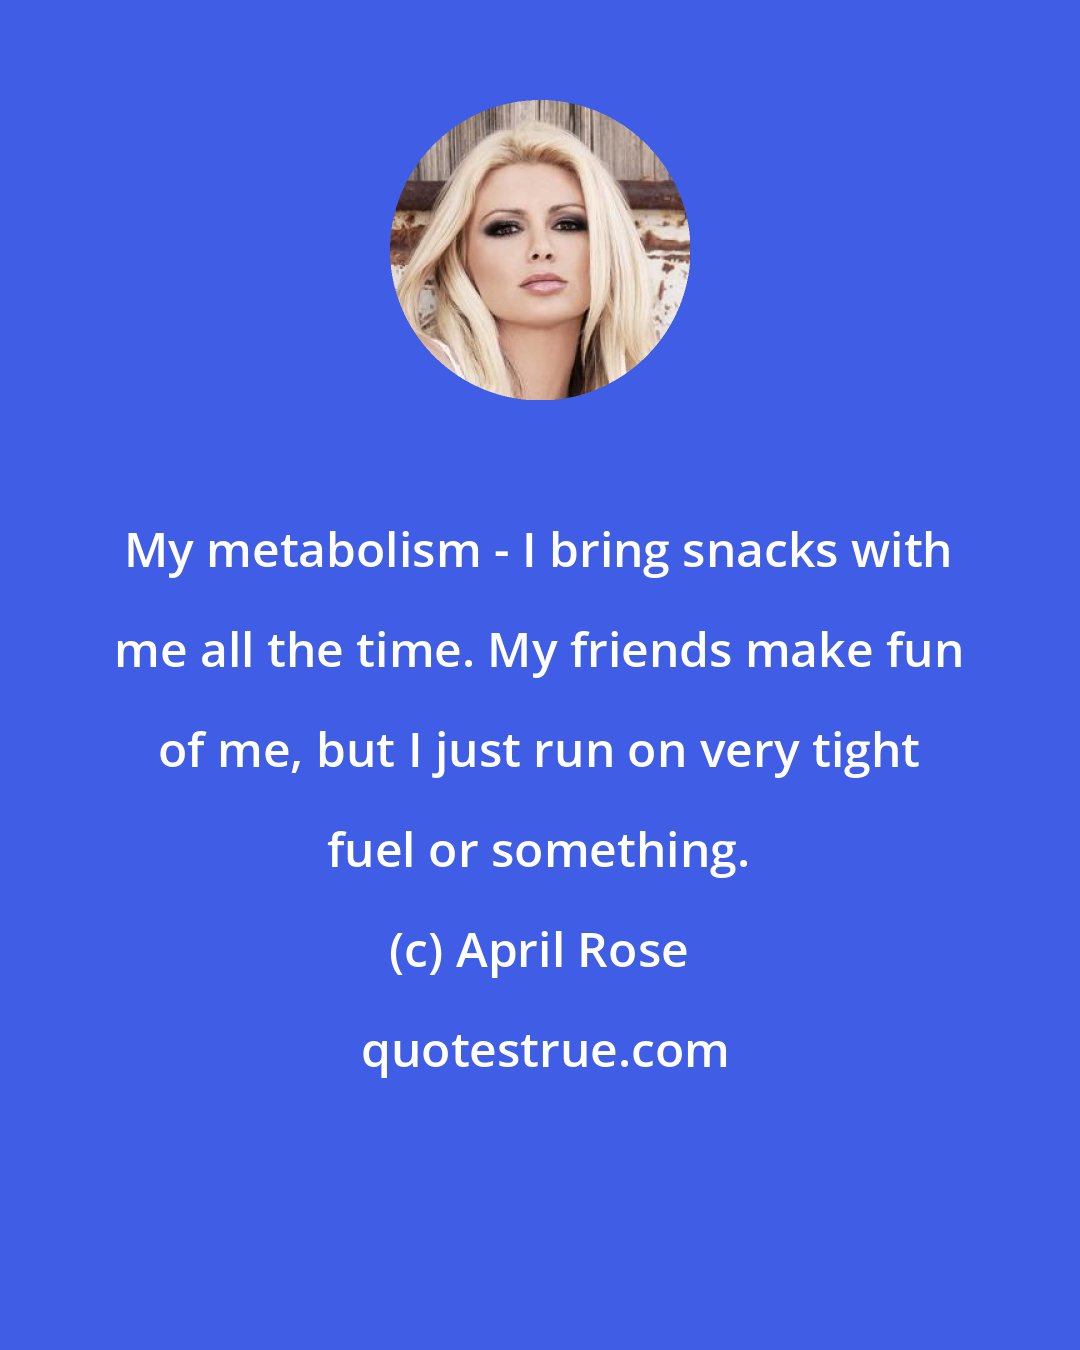 April Rose: My metabolism - I bring snacks with me all the time. My friends make fun of me, but I just run on very tight fuel or something.